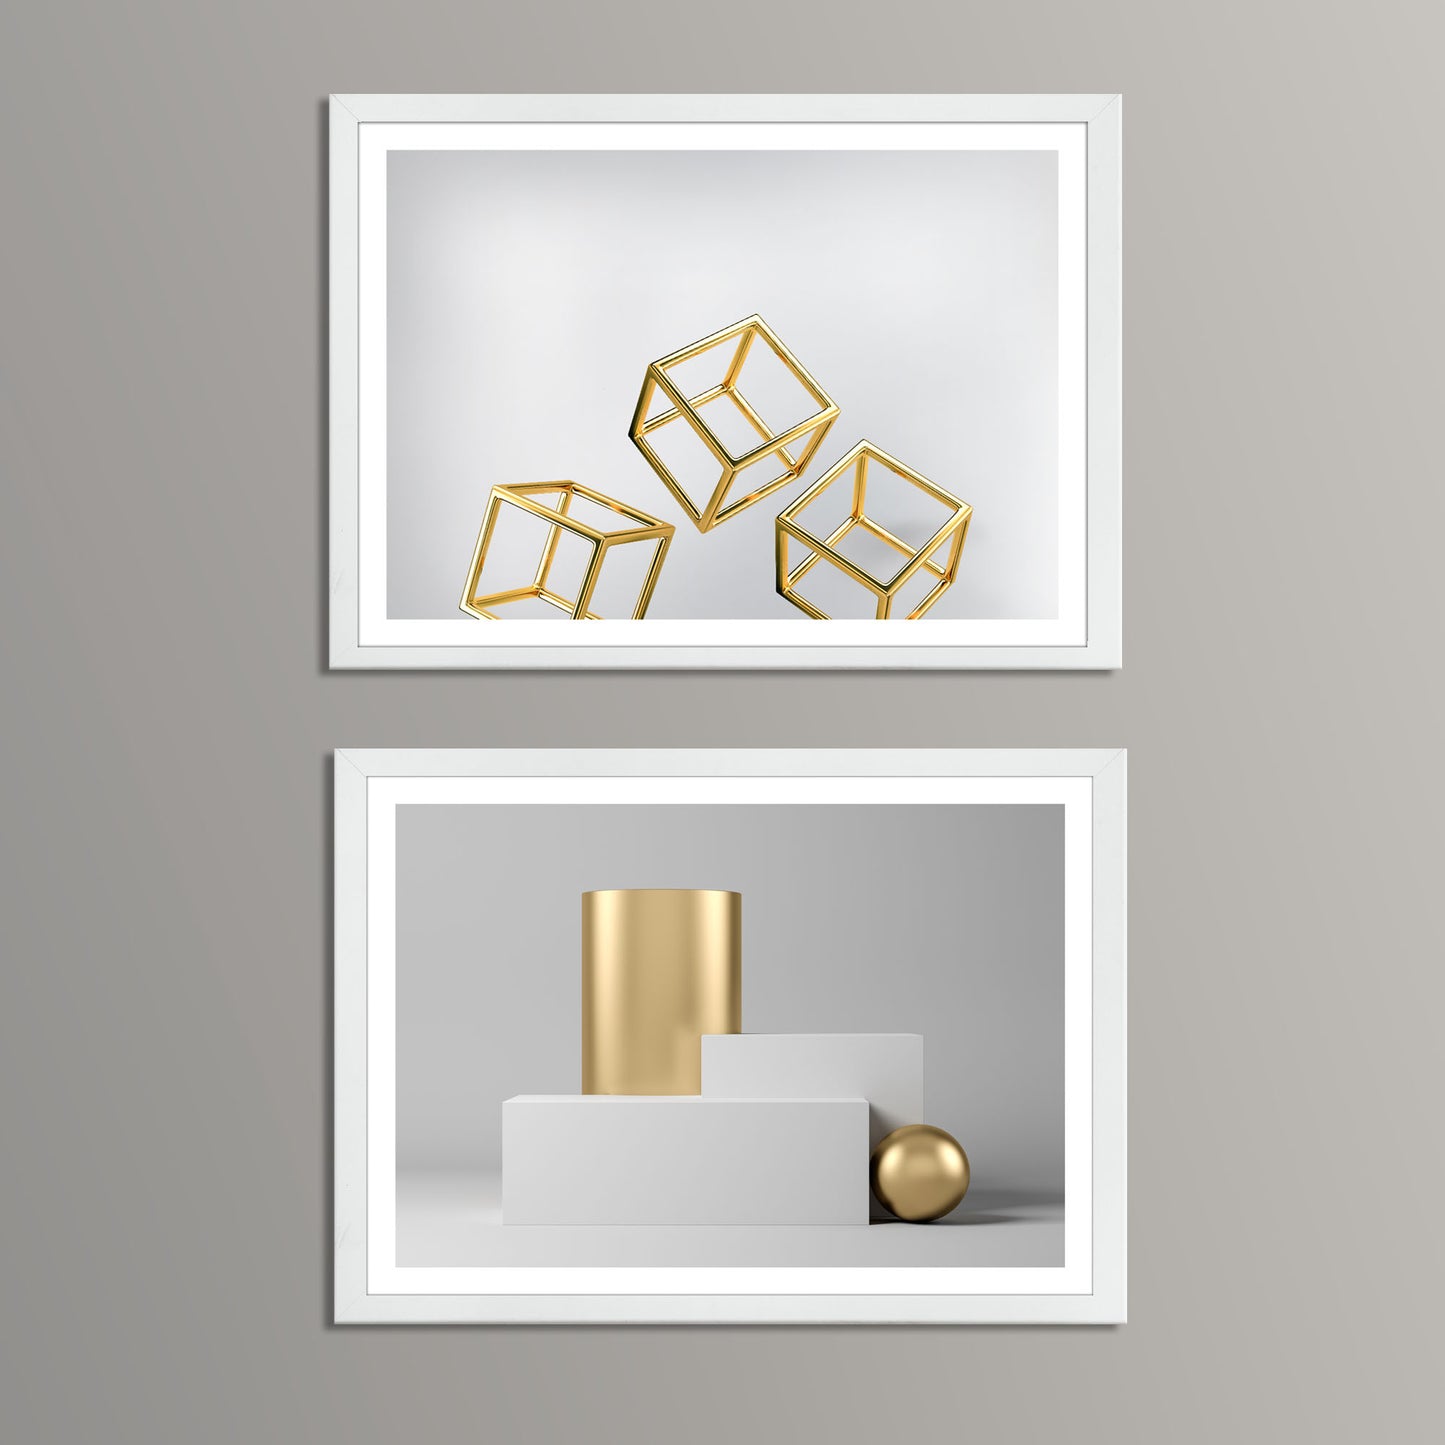 Contemporary Gold Shapes Art Print